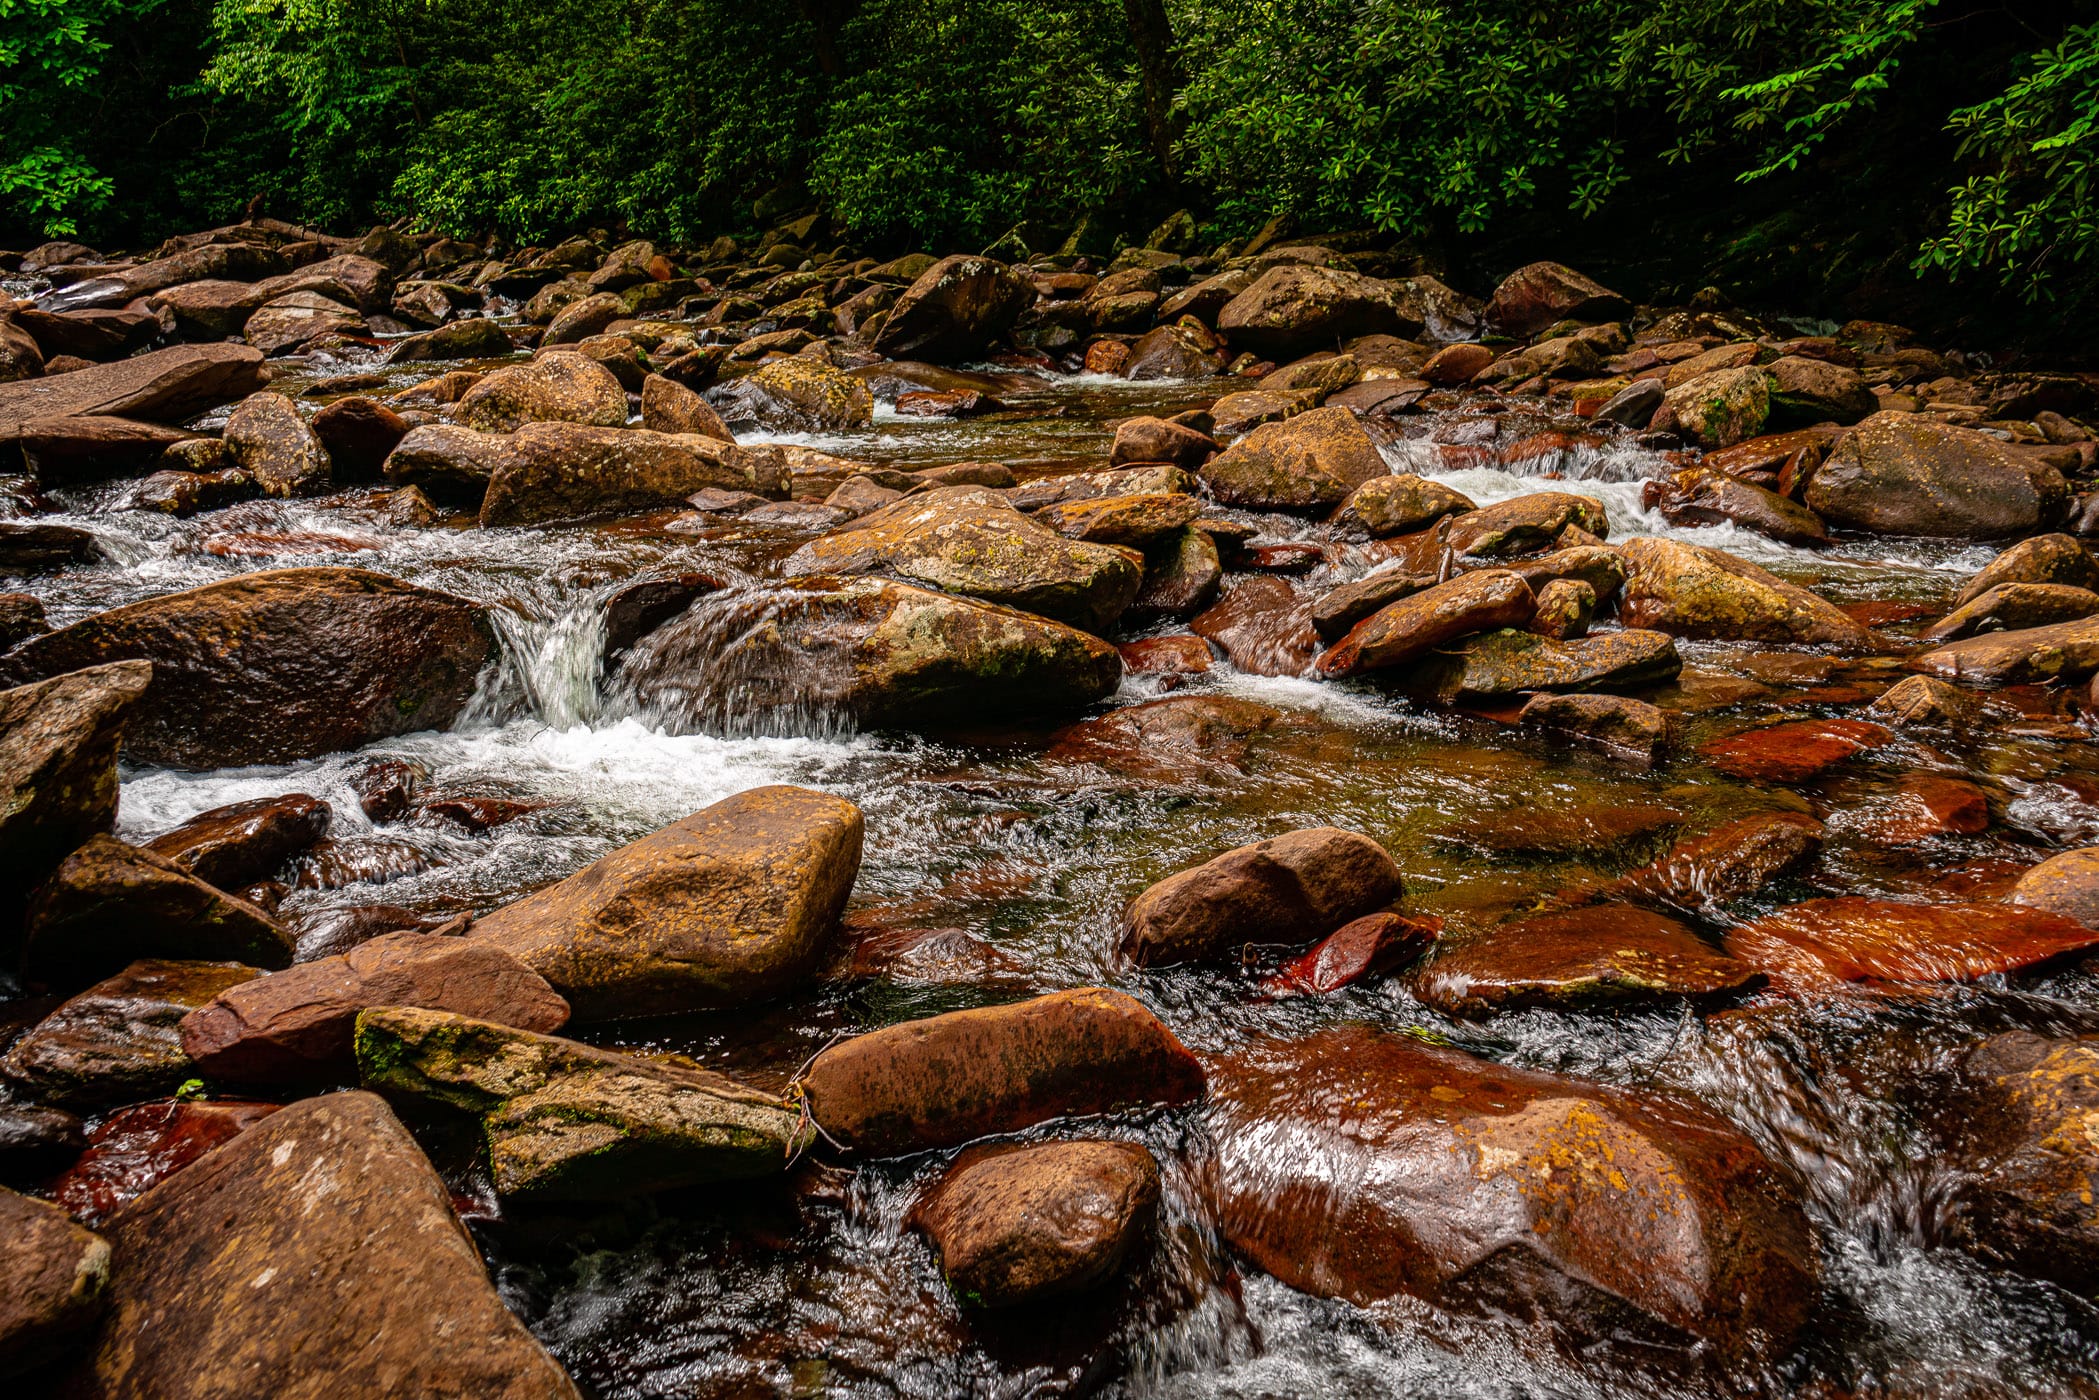 A rocky stream in the Great Smoky Mountains National Park, Tennessee.